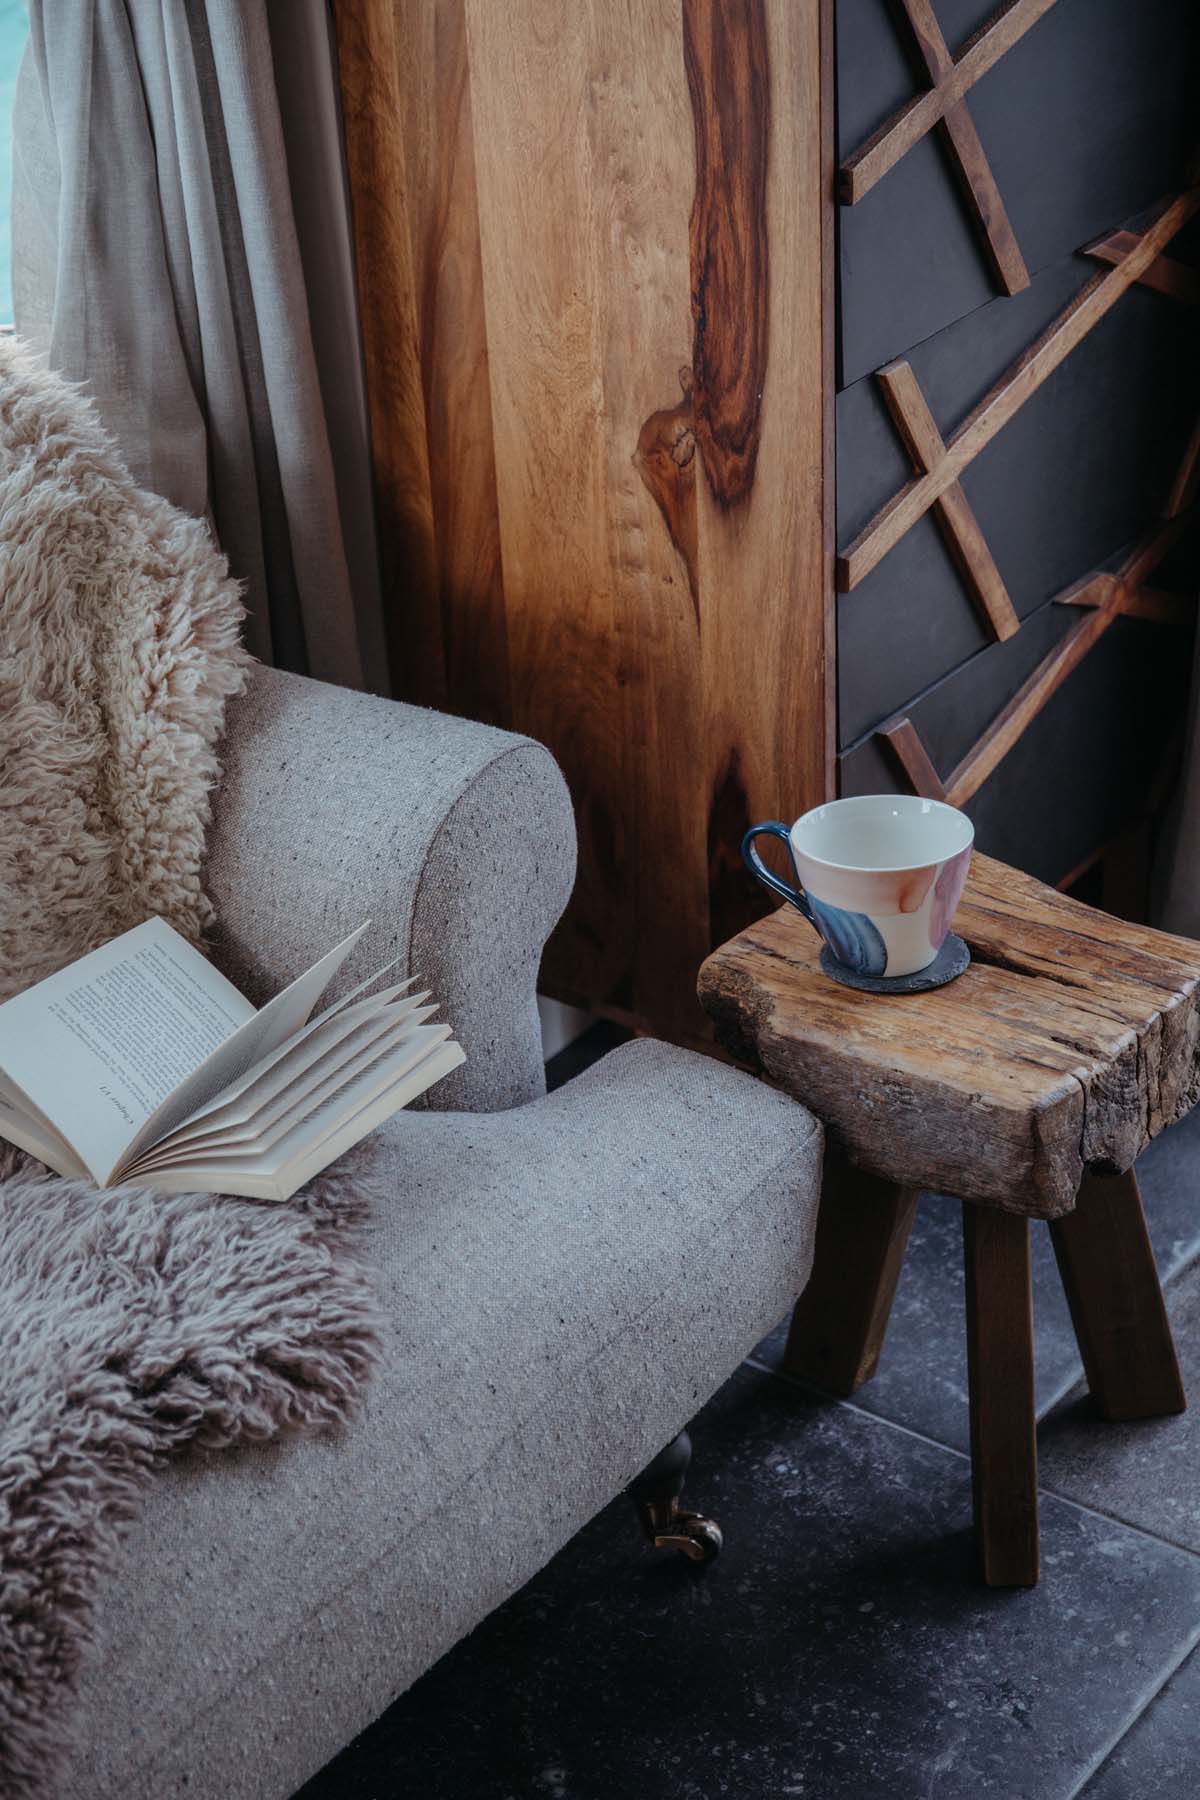 A cup of tea and a book by the sofa